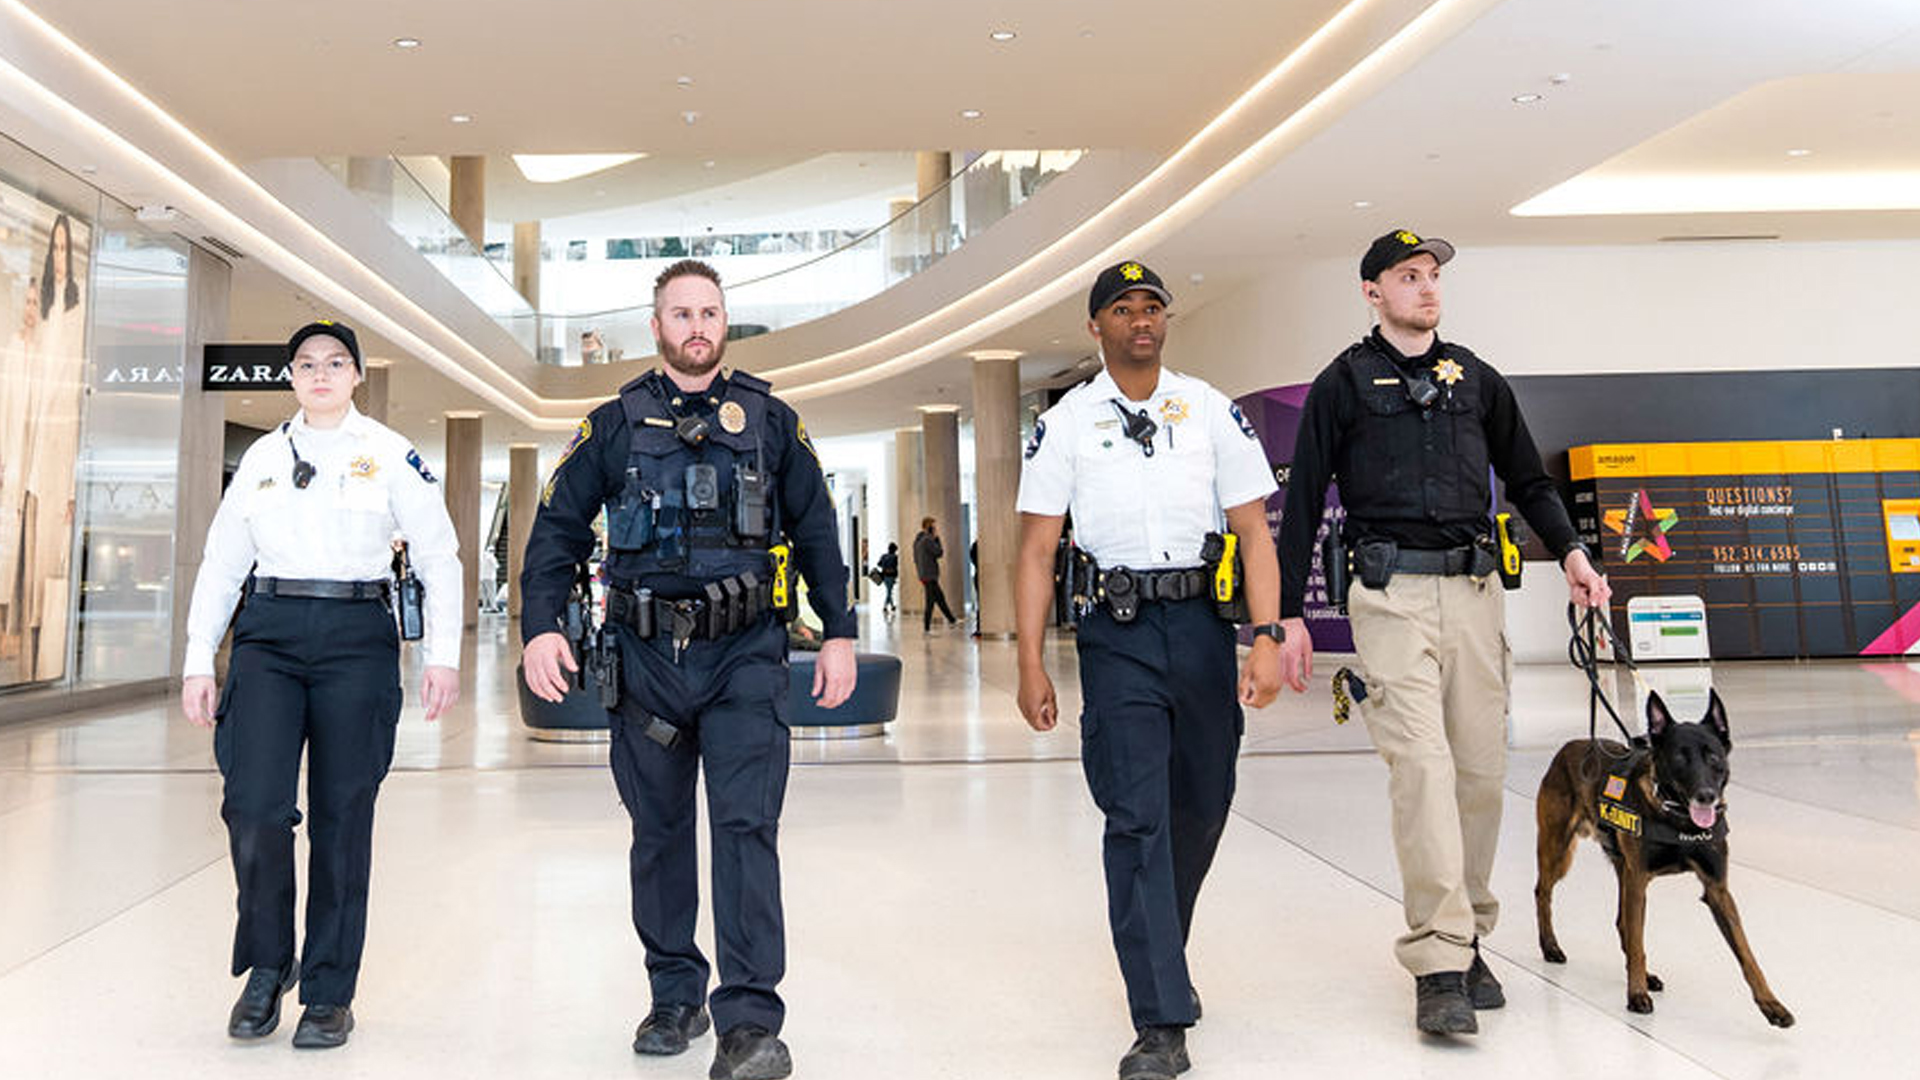 The Mall at Green Hills ramps up security